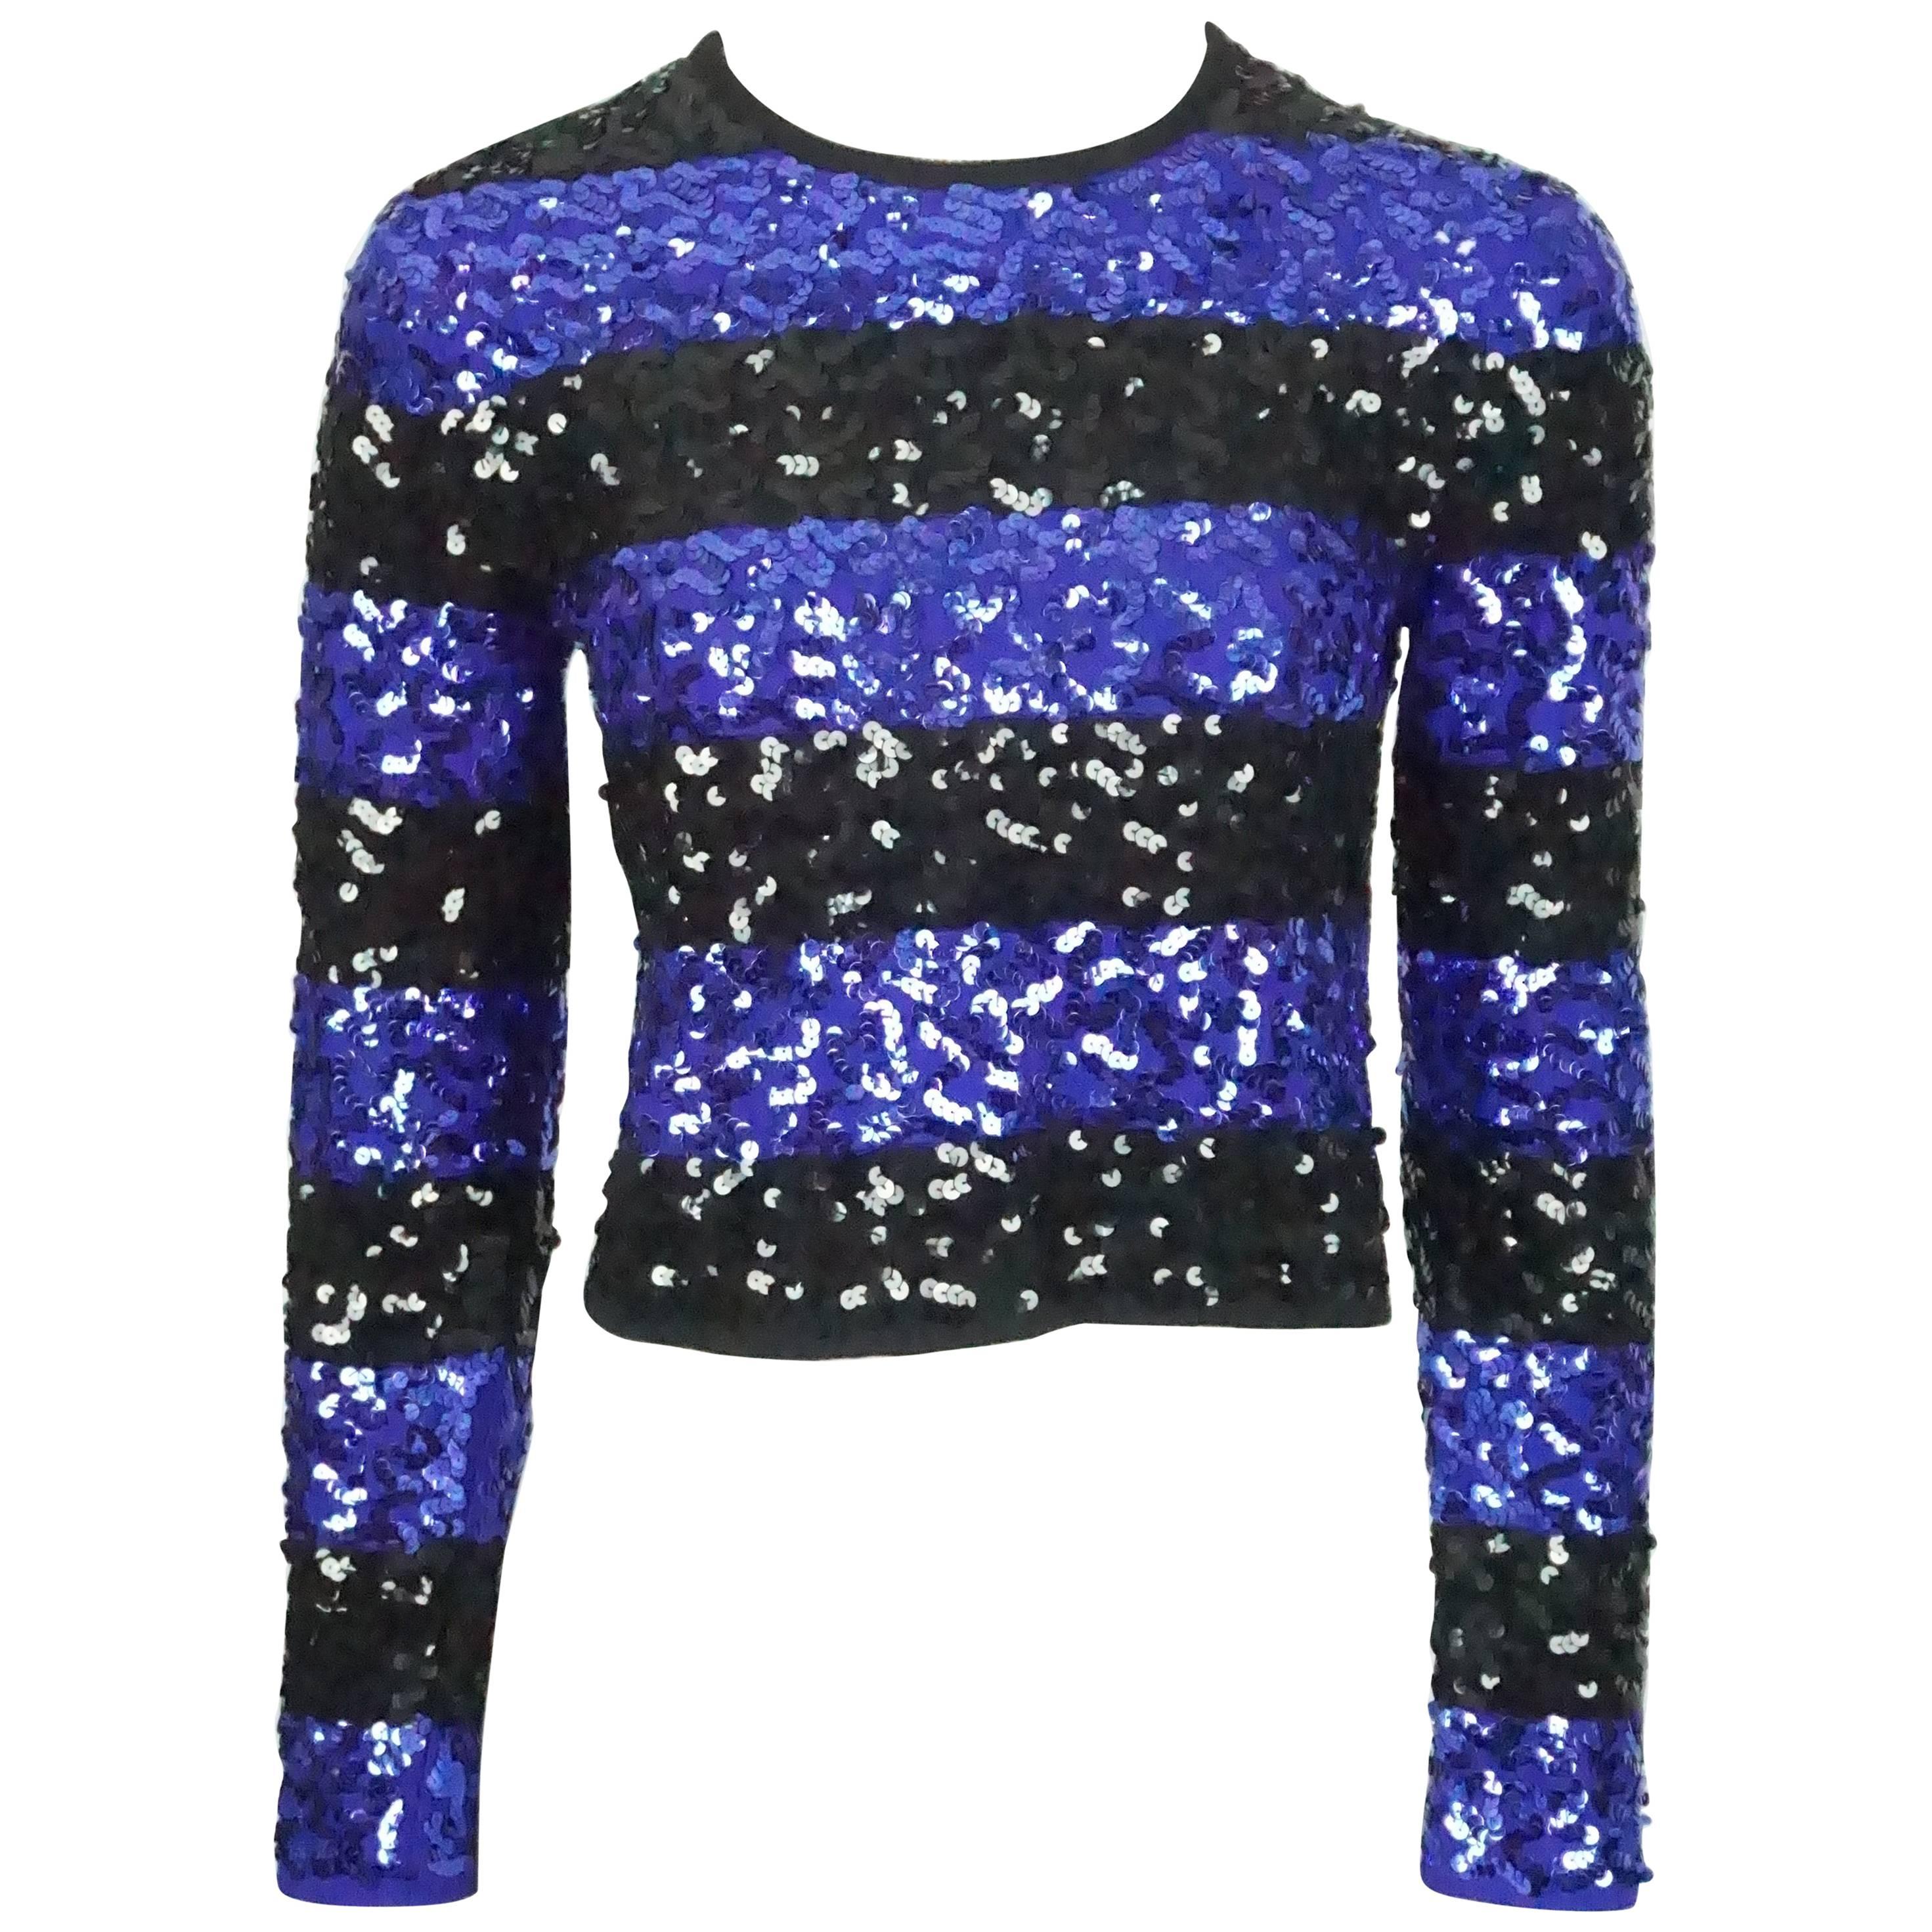 Sonia Rykiel Blue and Black Striped Sequin Crop Sweater - 38 - Circa 80's For Sale